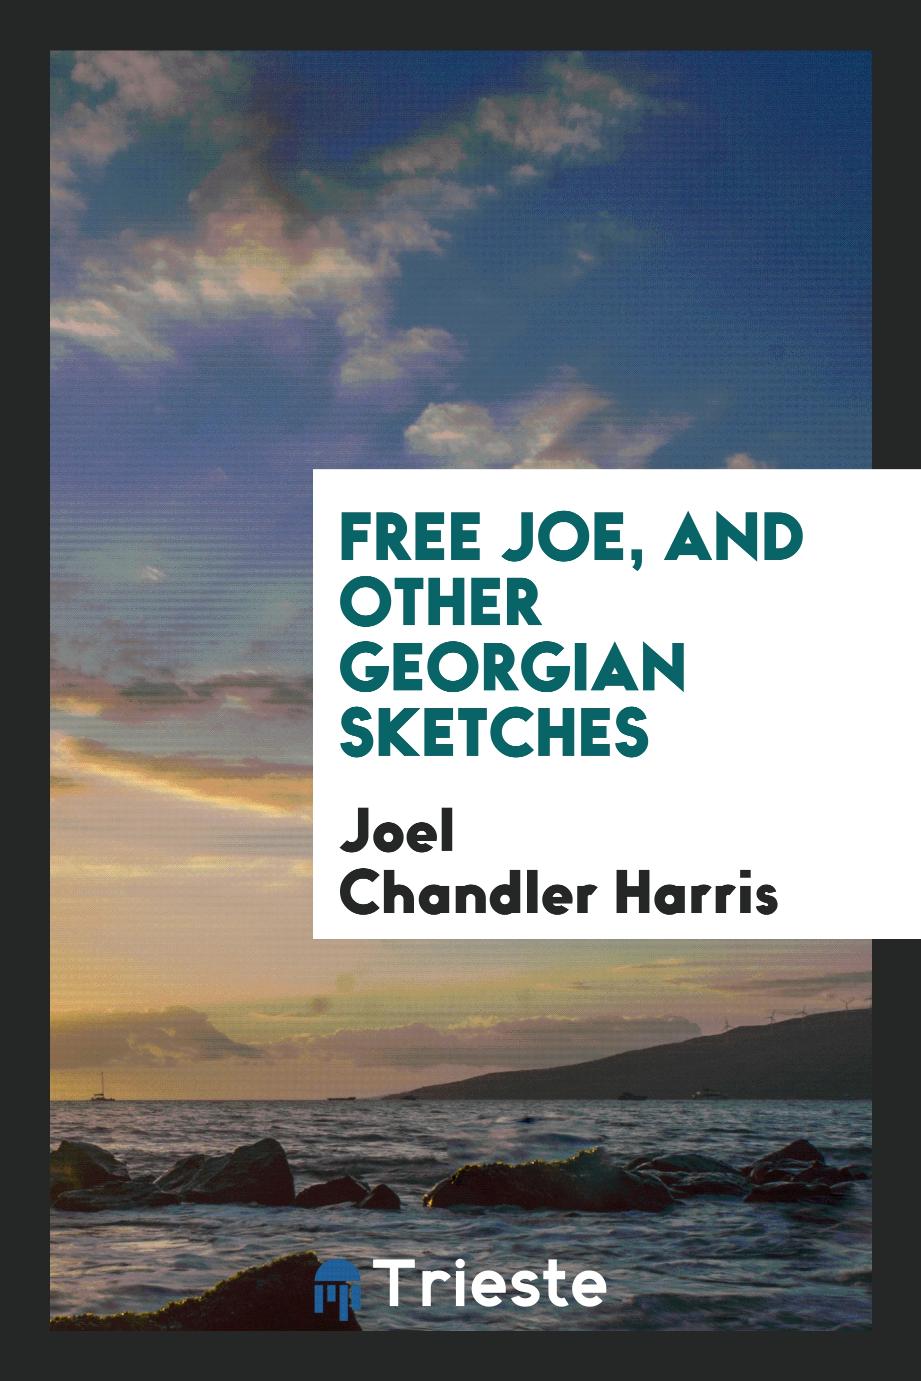 Free Joe, and other Georgian sketches